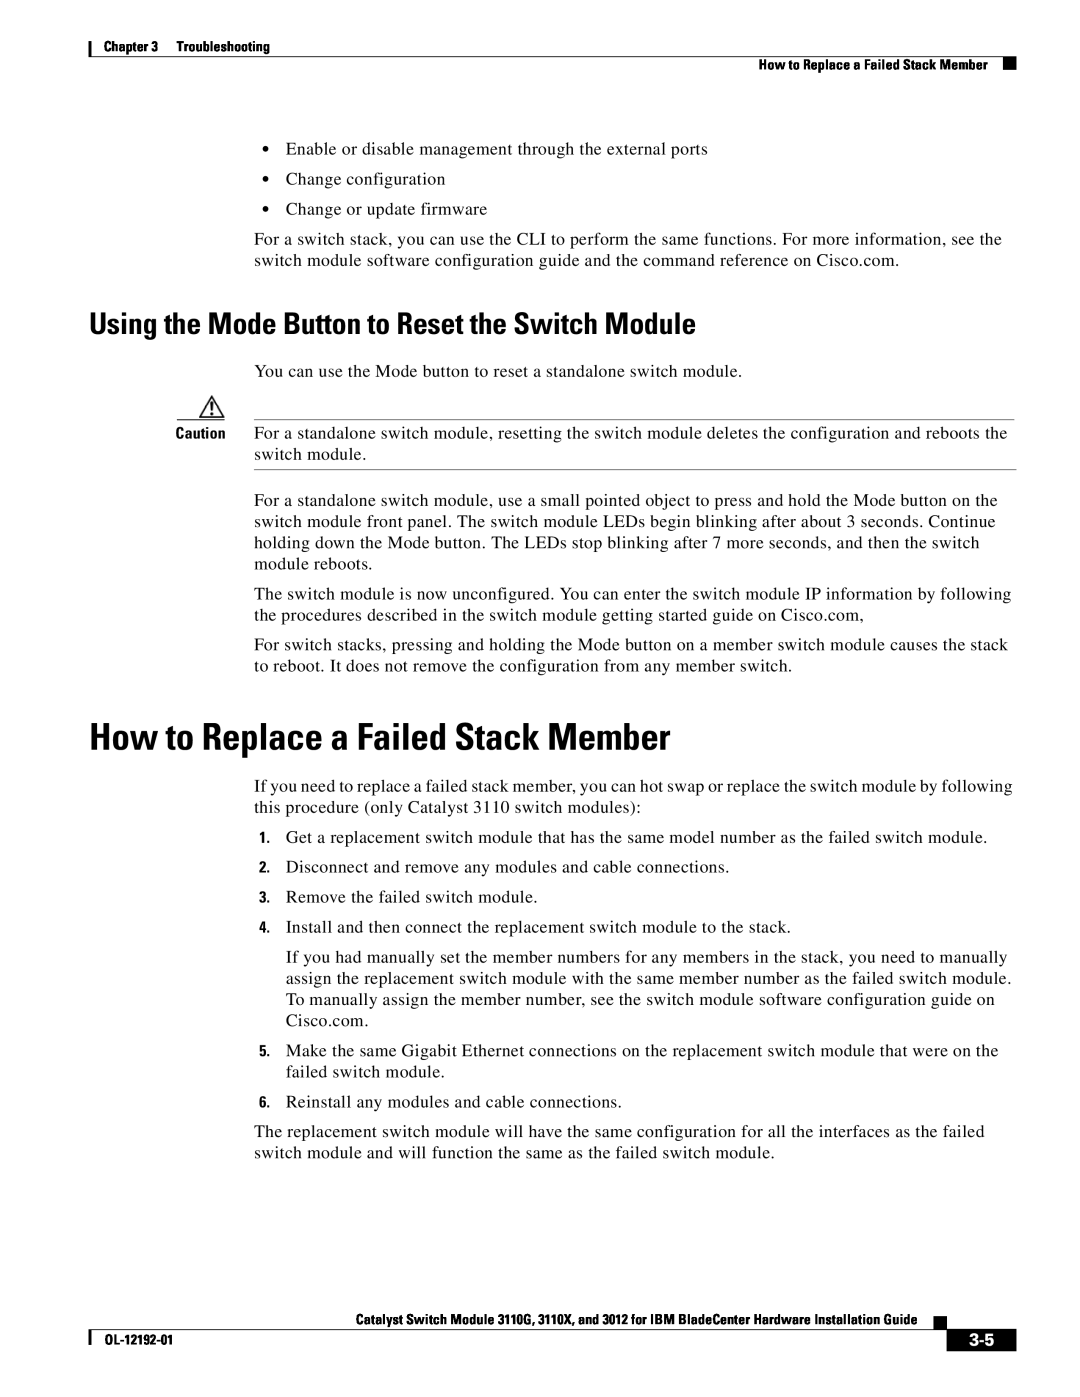 Cisco Systems 3012, 3110X, 3110G How to Replace a Failed Stack Member, Using the Mode Button to Reset the Switch Module 